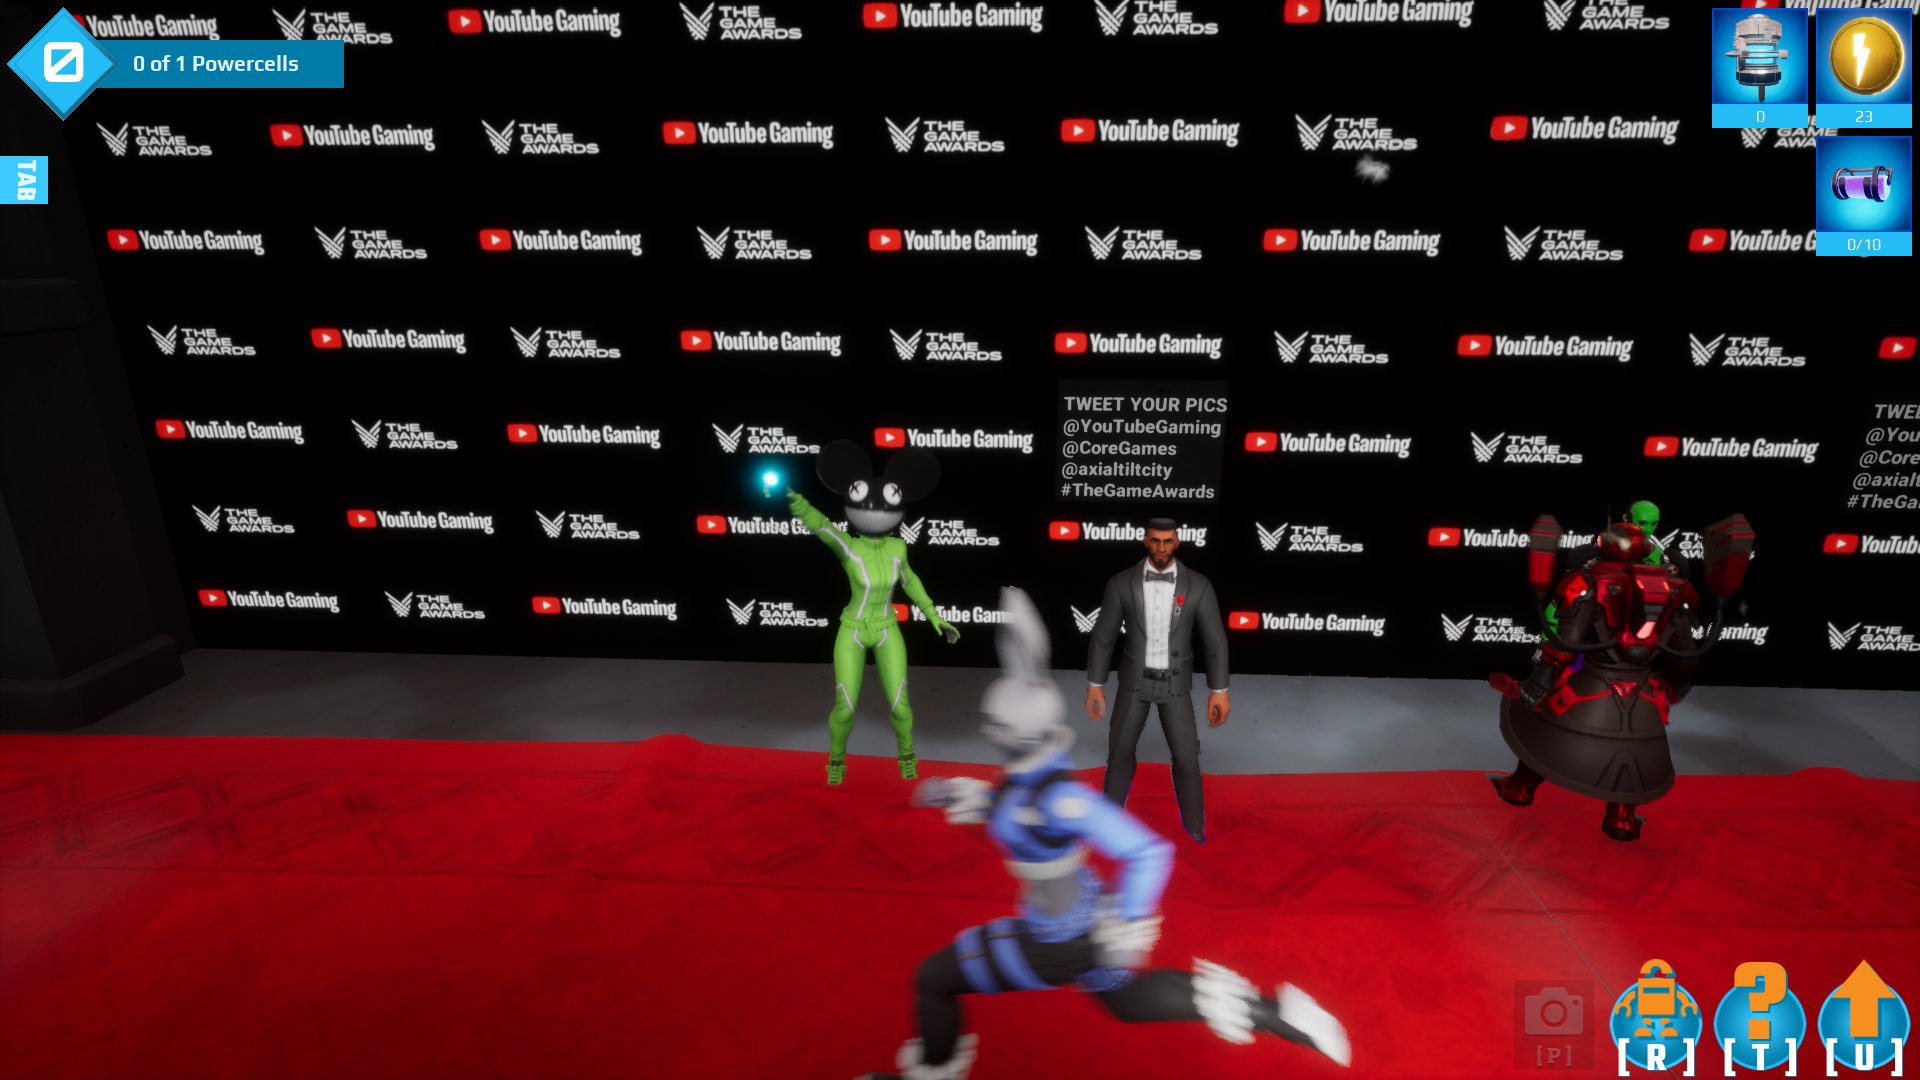 The Game Awards 2021 includes a red carpet metaverse